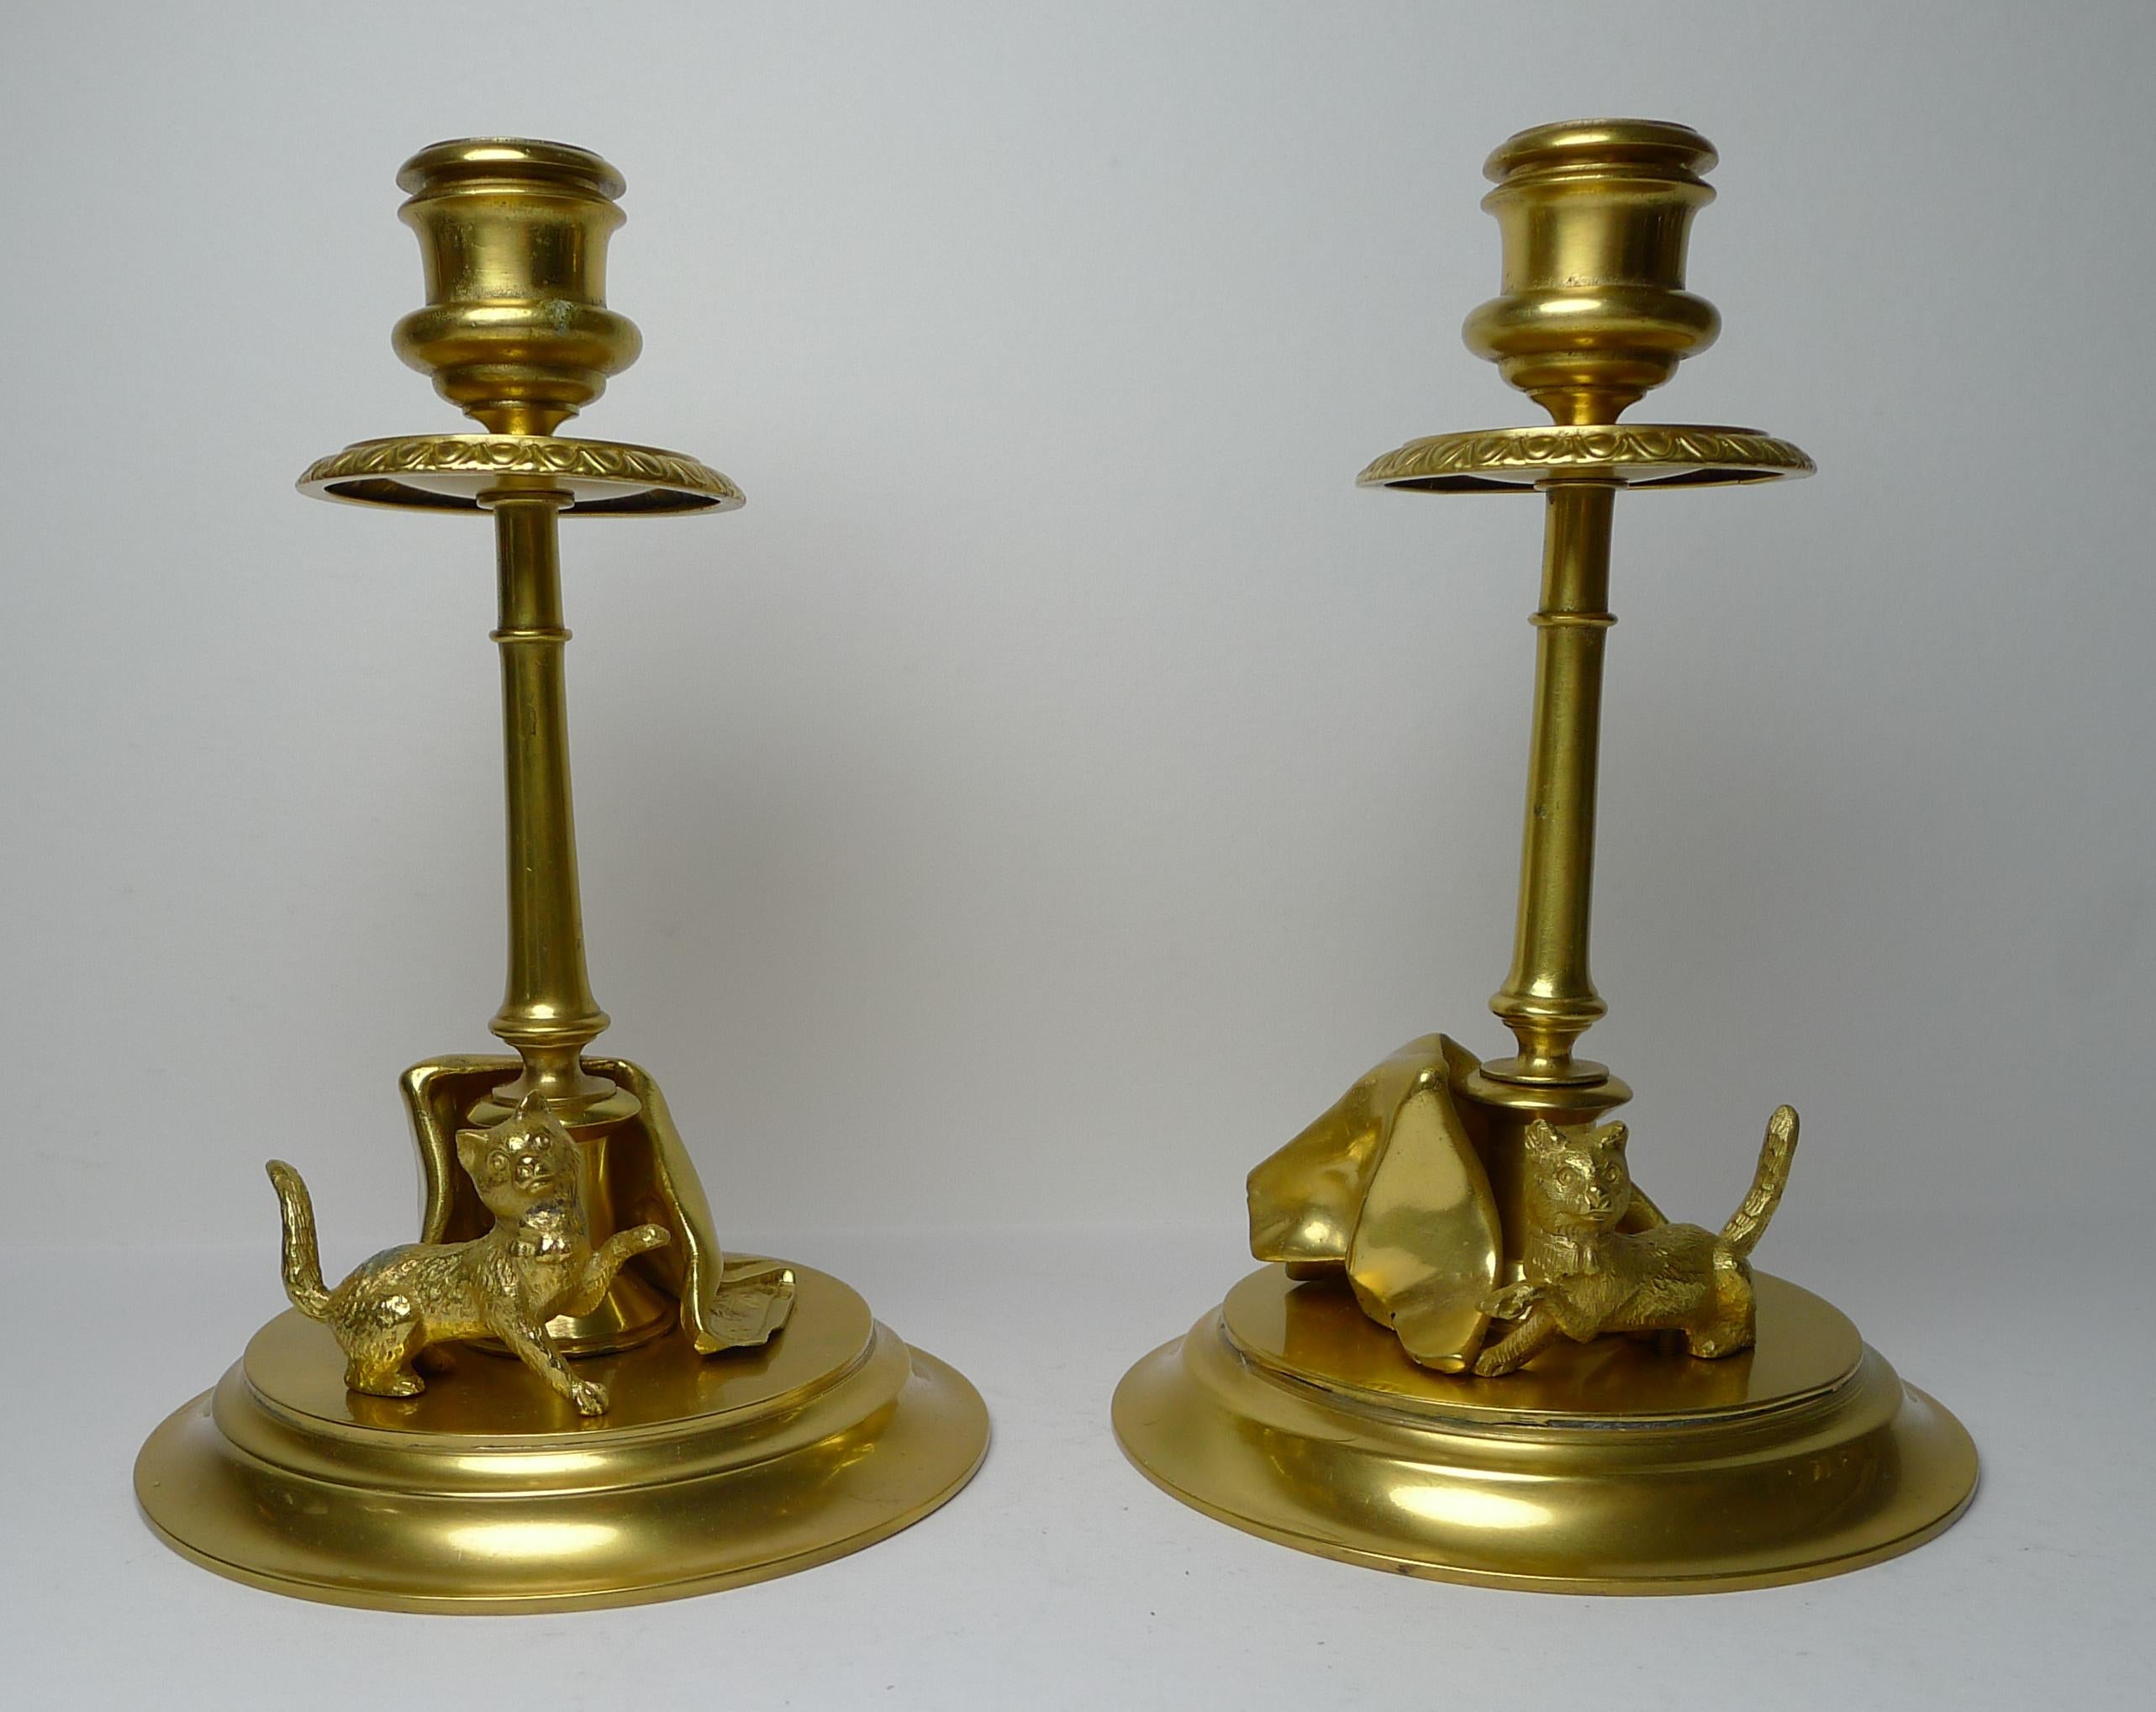 A rare and magnificent English desk set made from gilded bronze in superb condition. The set consists of a pair of candlesticks, a pen tray, an inkwell, a seal and a letter opener.

All pieces feature cast cats or kittens playing with rugs and